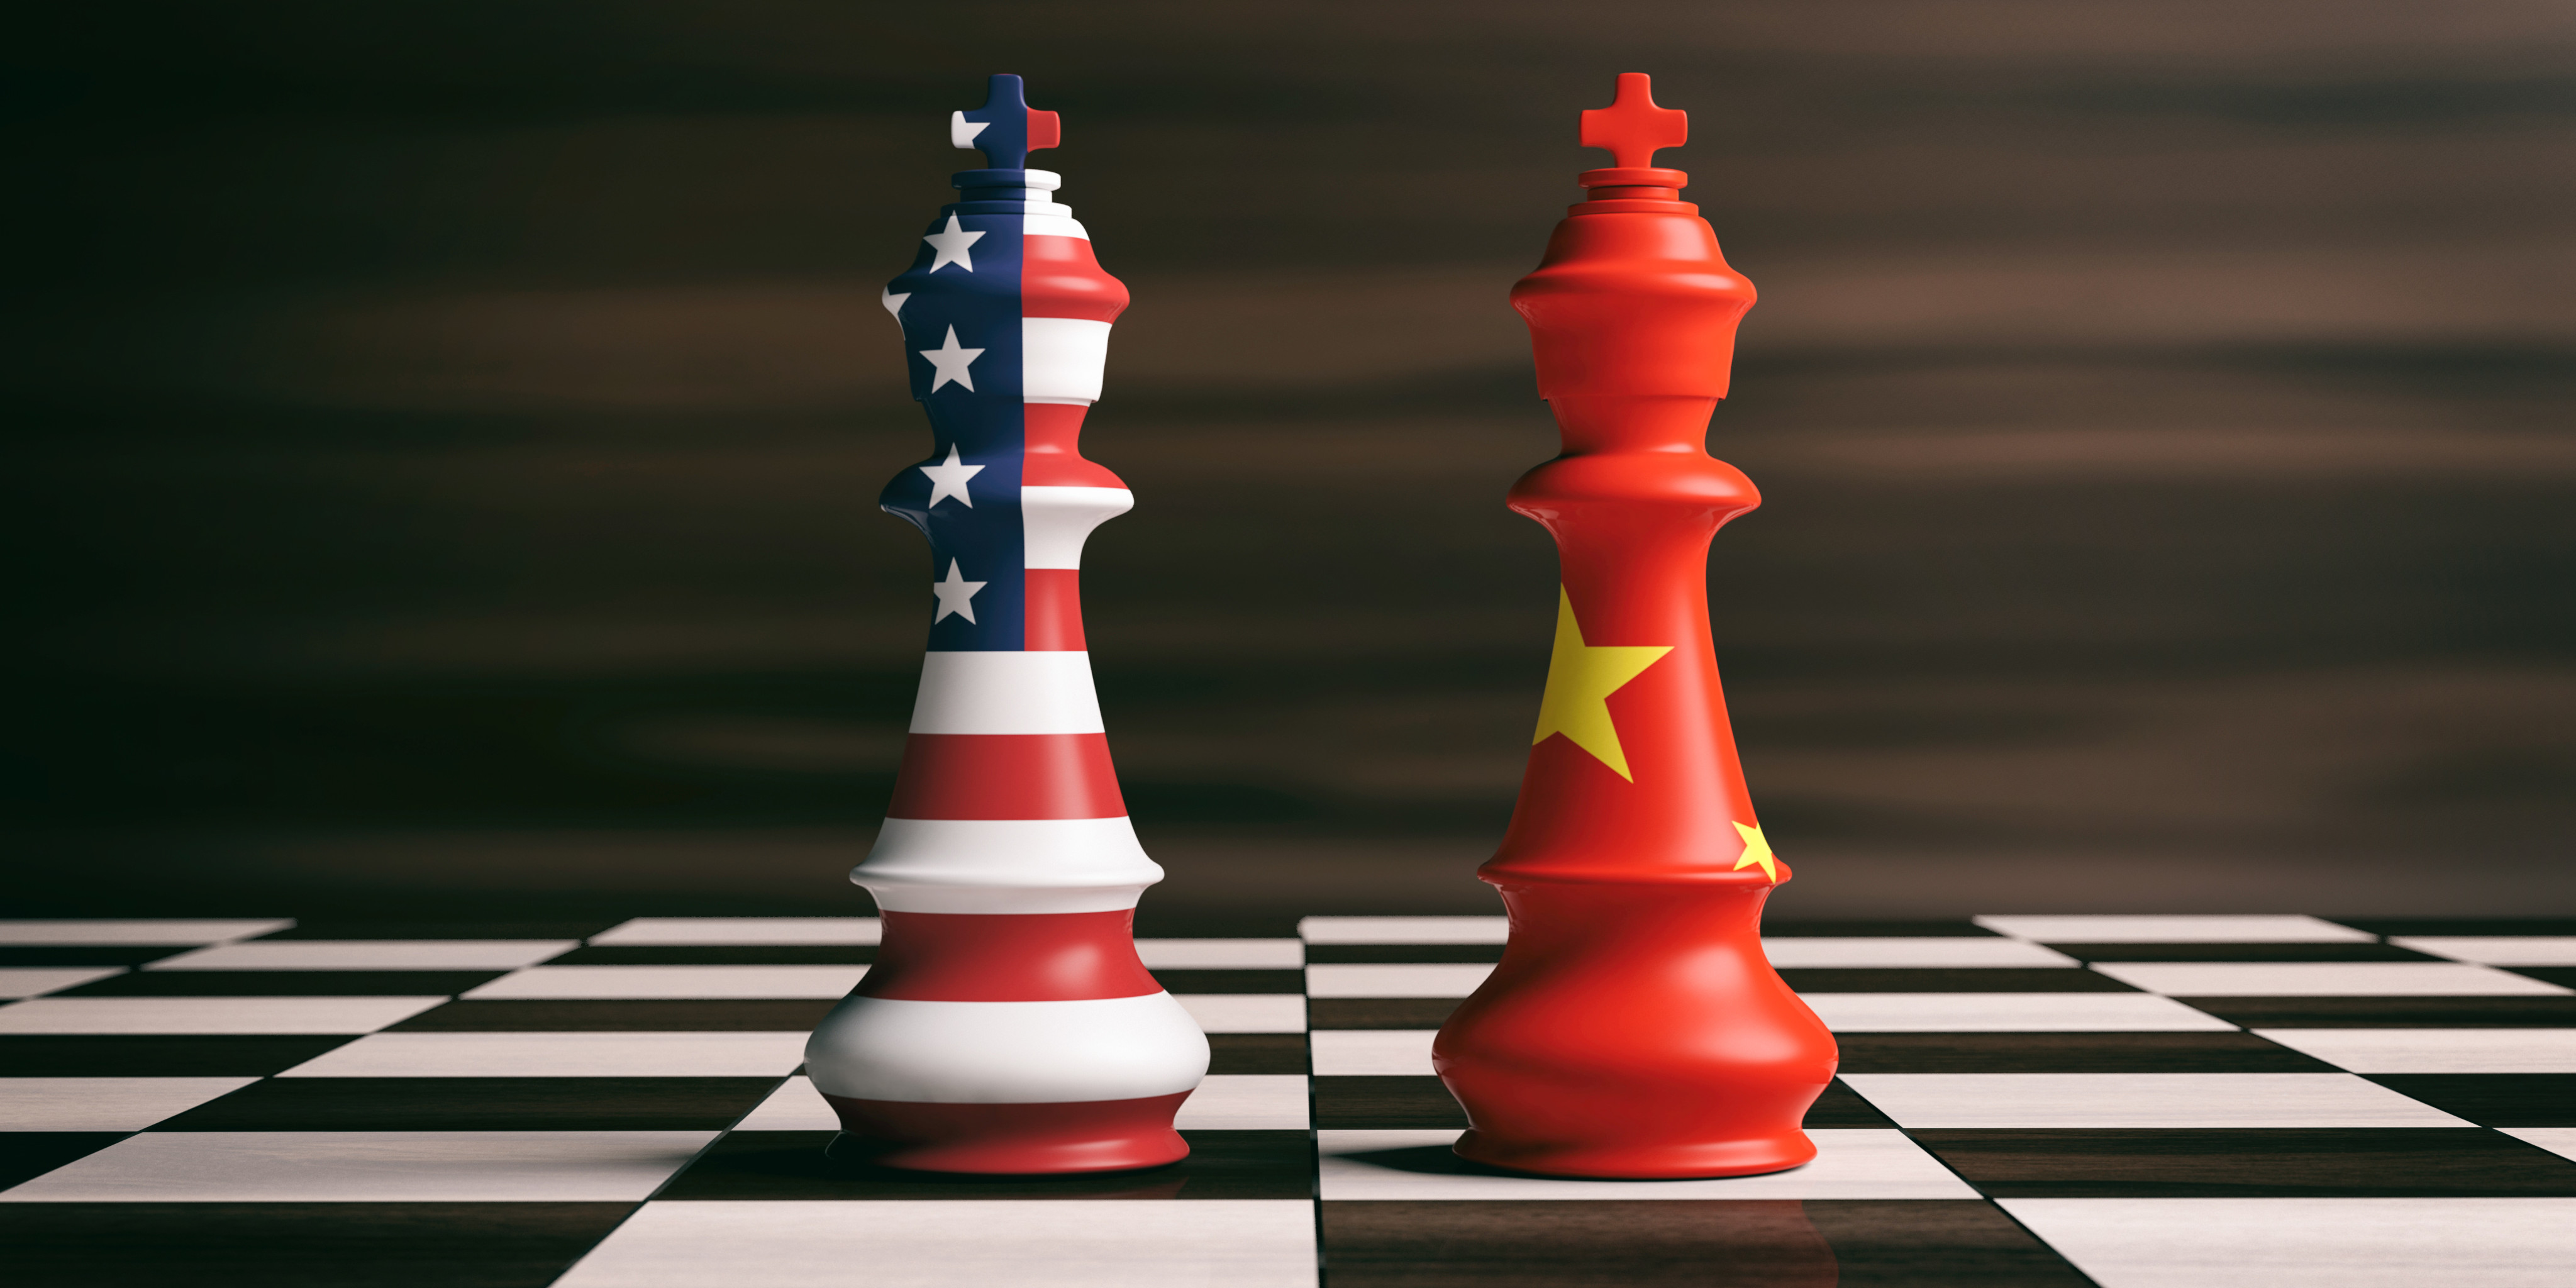 US-China ties have been strained for years as the countries clashed over technology, human rights, trade, military developments and regional security. Photo: Shutterstock